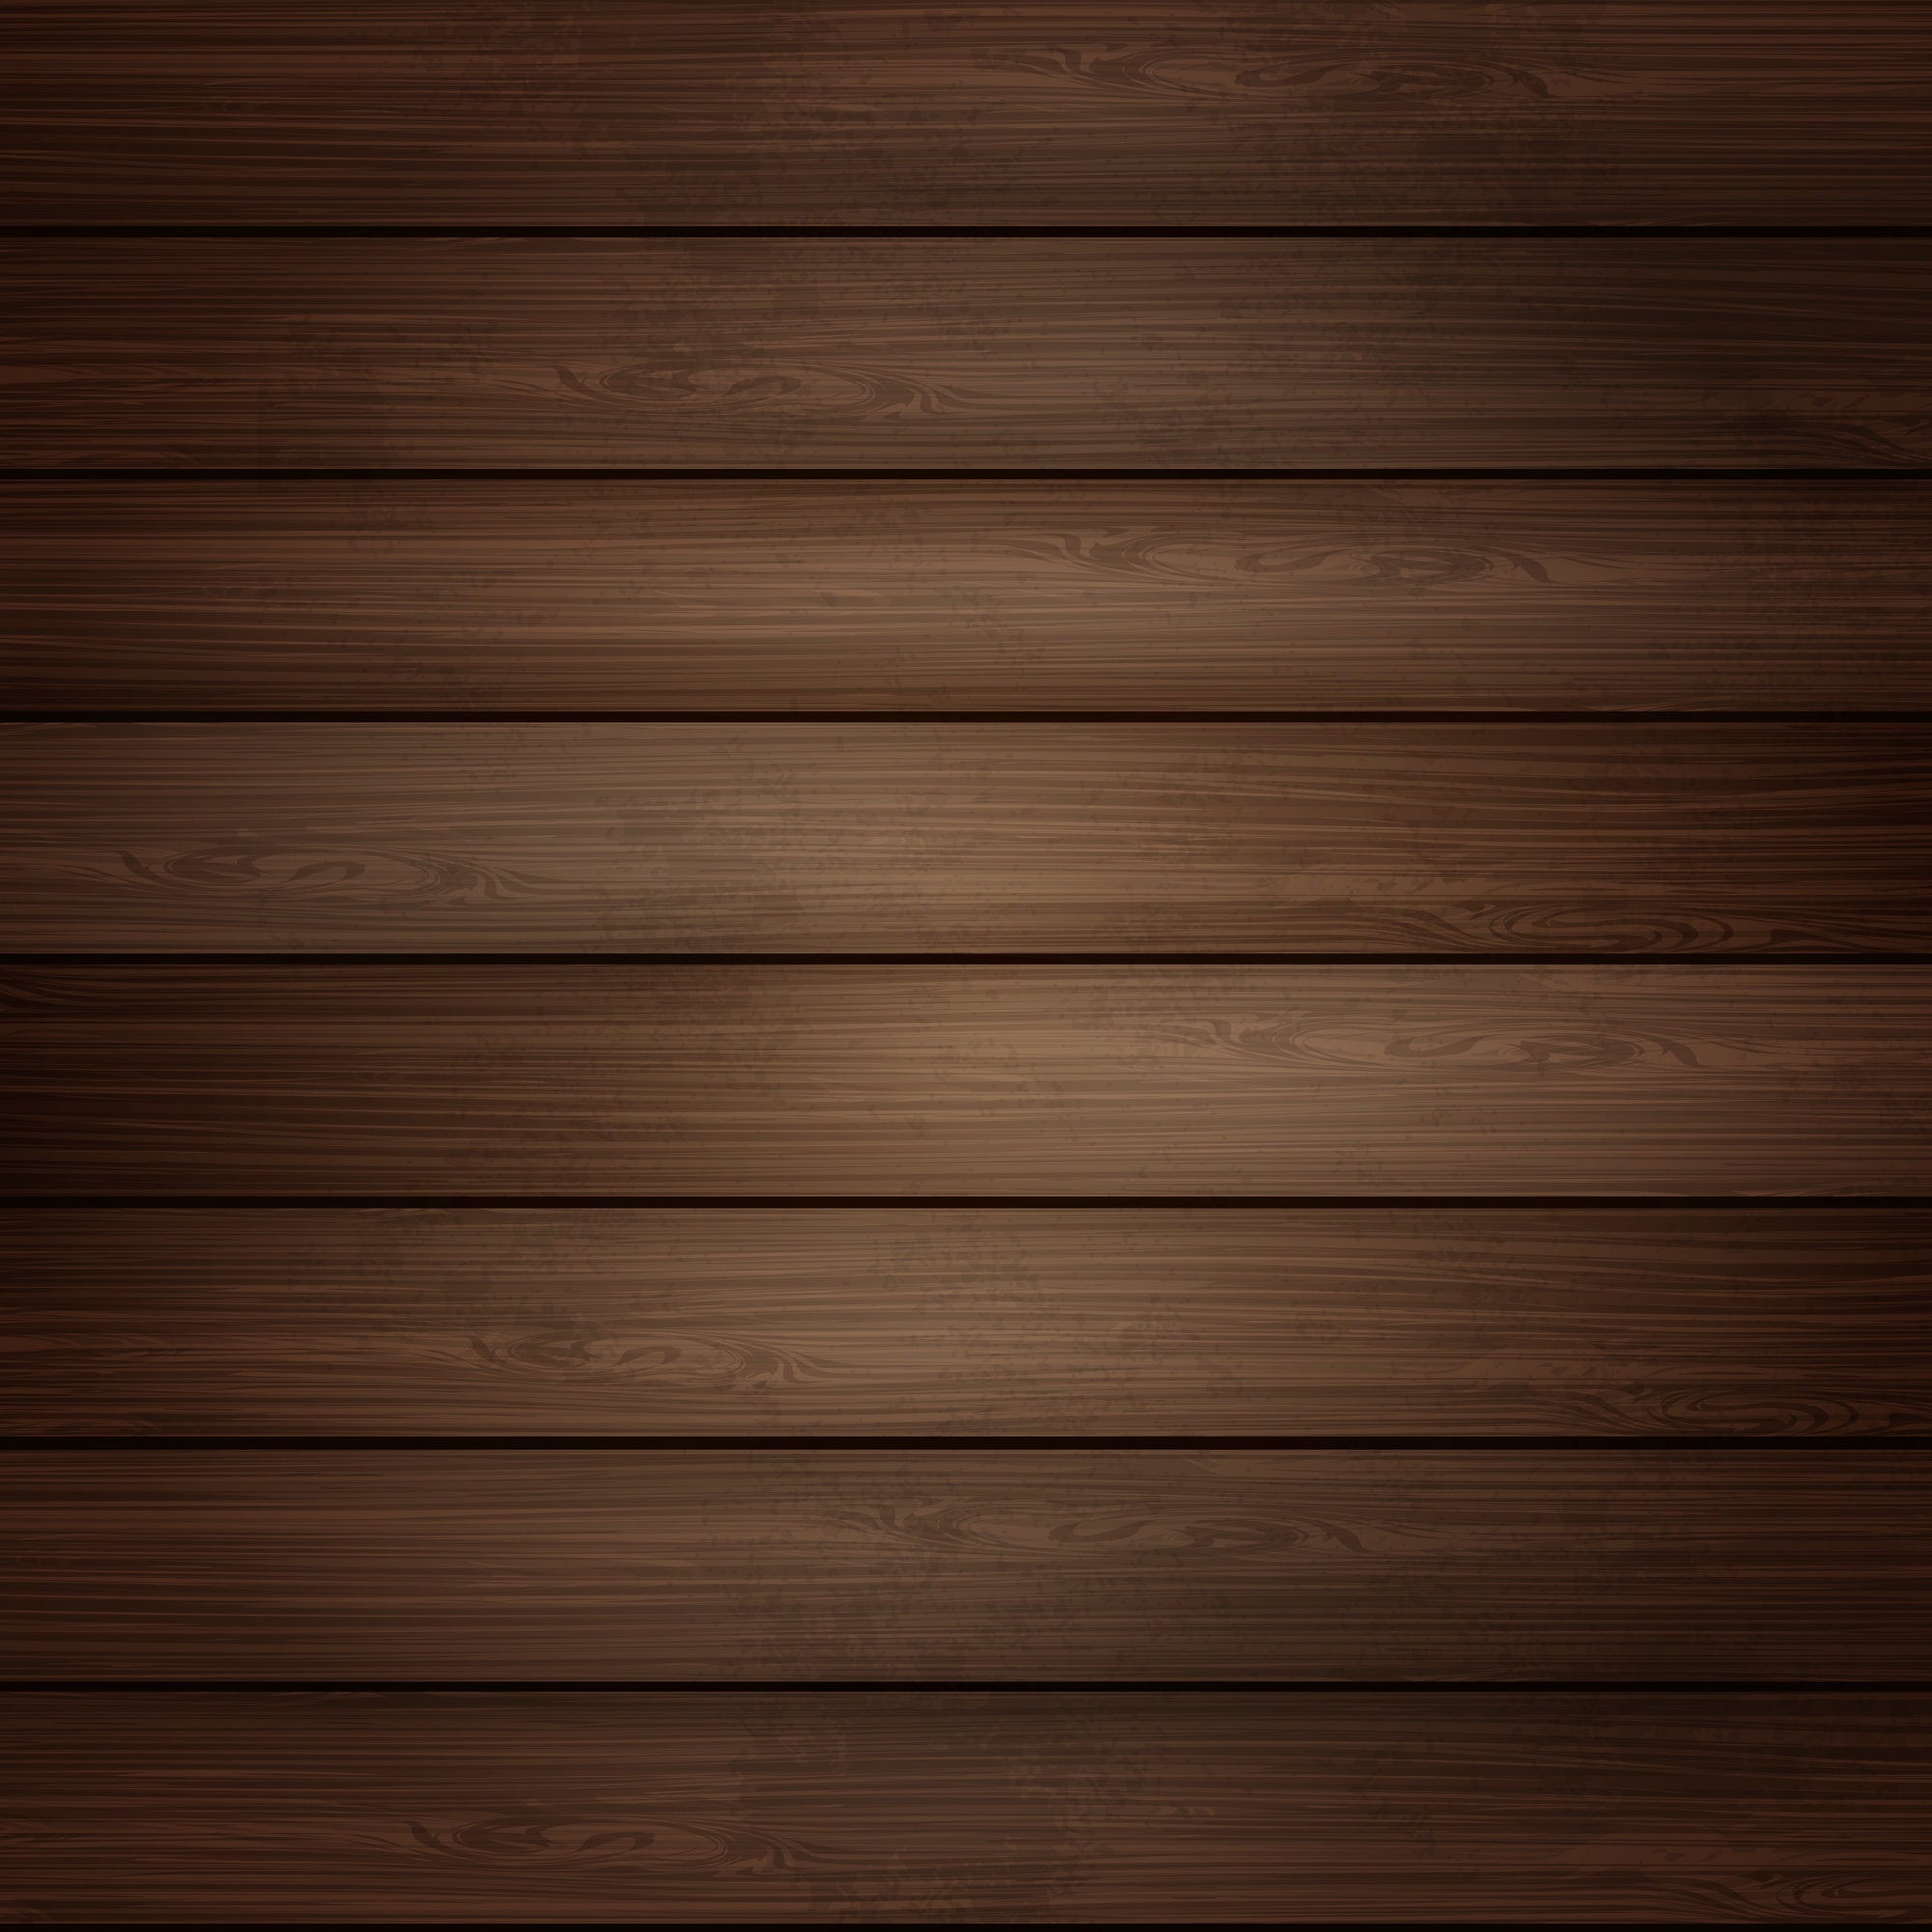 Wooden Panels Background